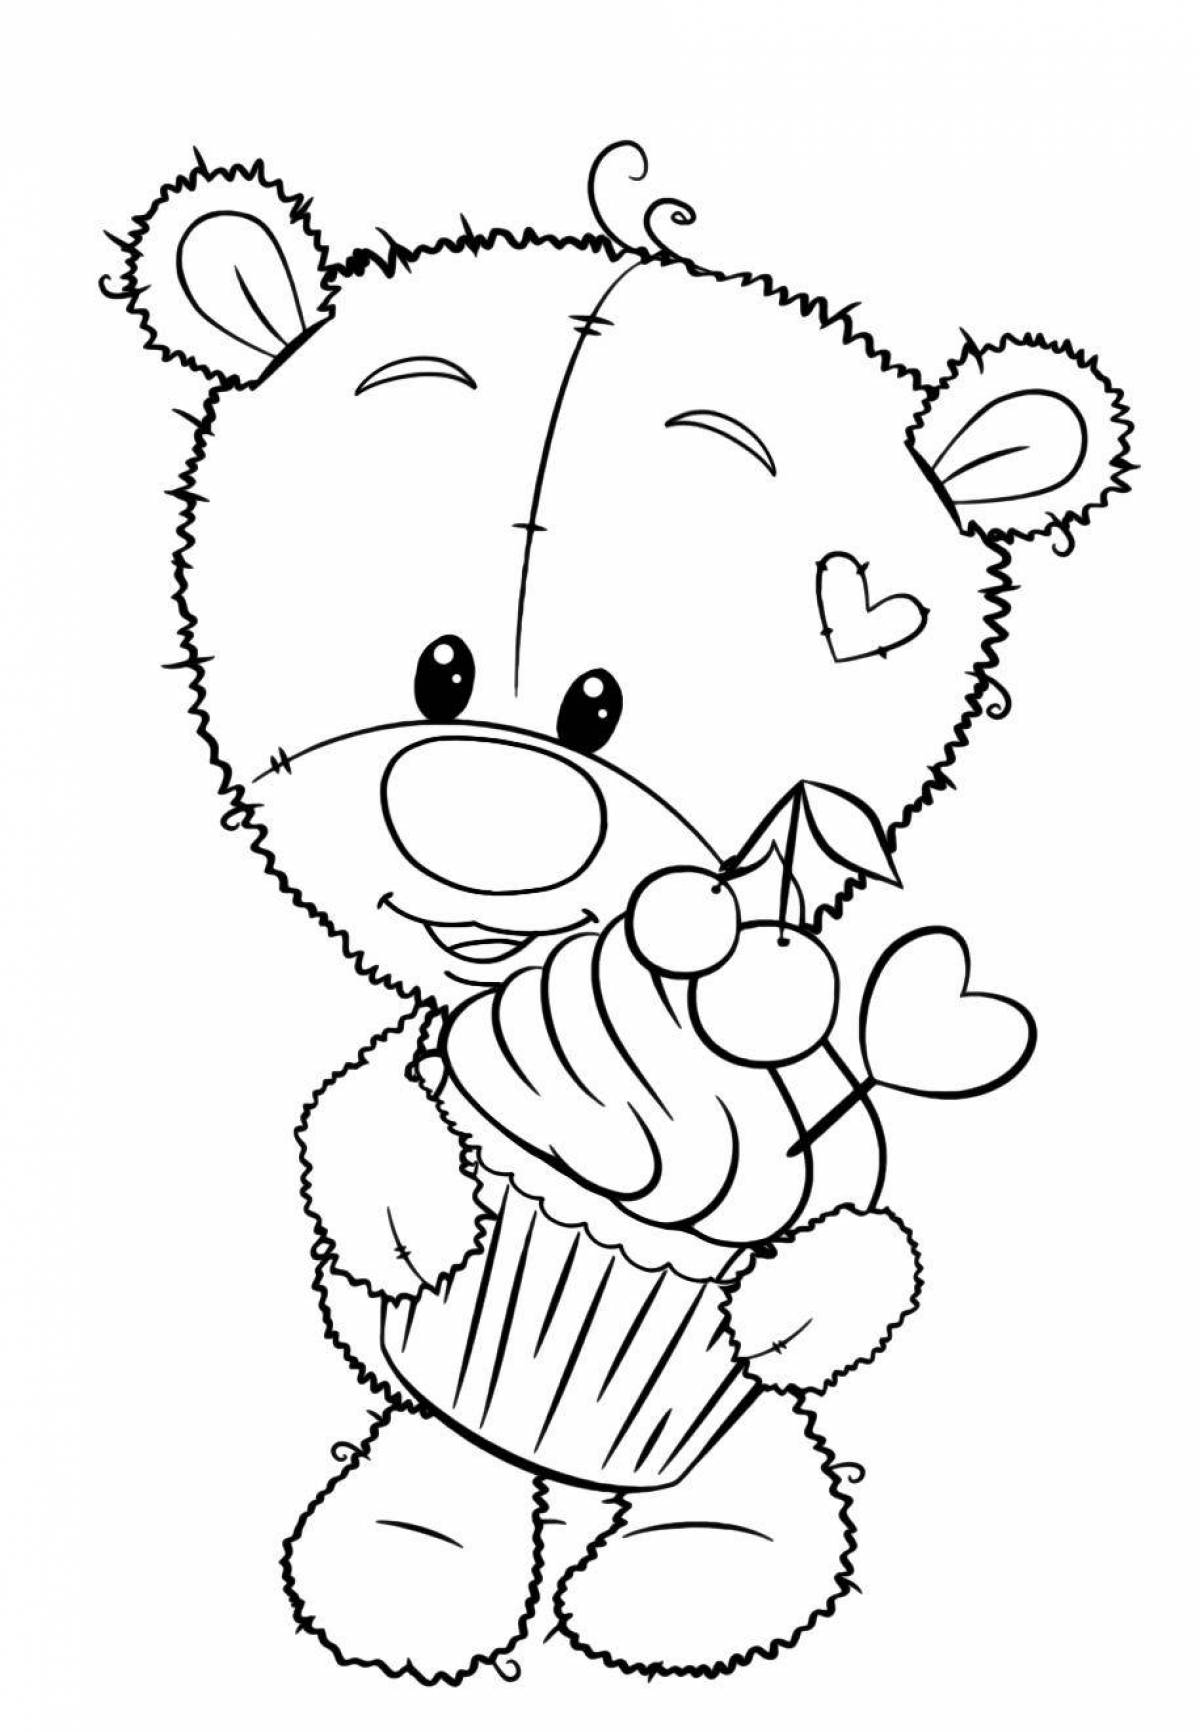 Amazing bear coloring for girls